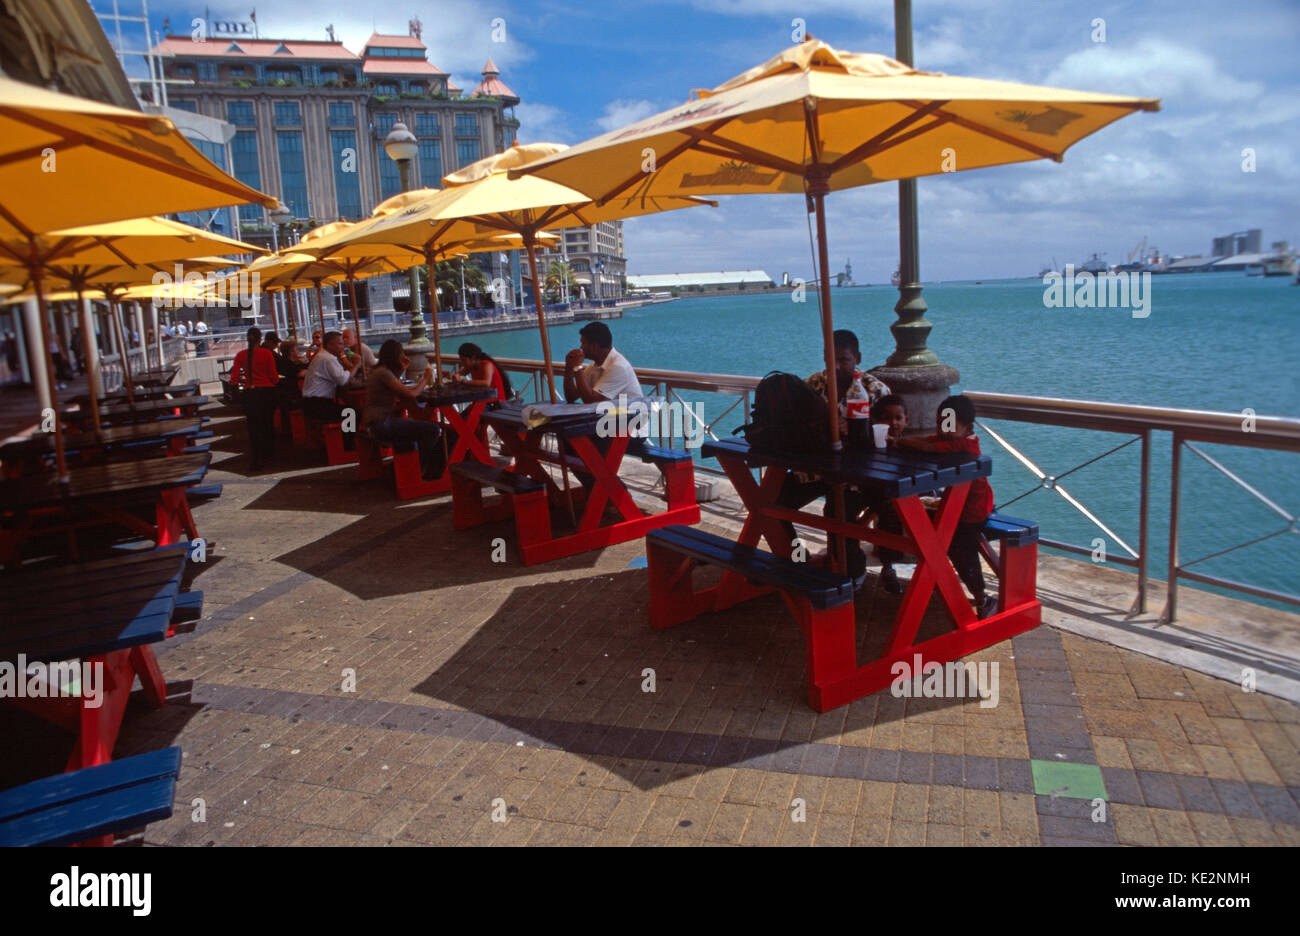 Seafront in Port Louis, Mauritius Stock Photo